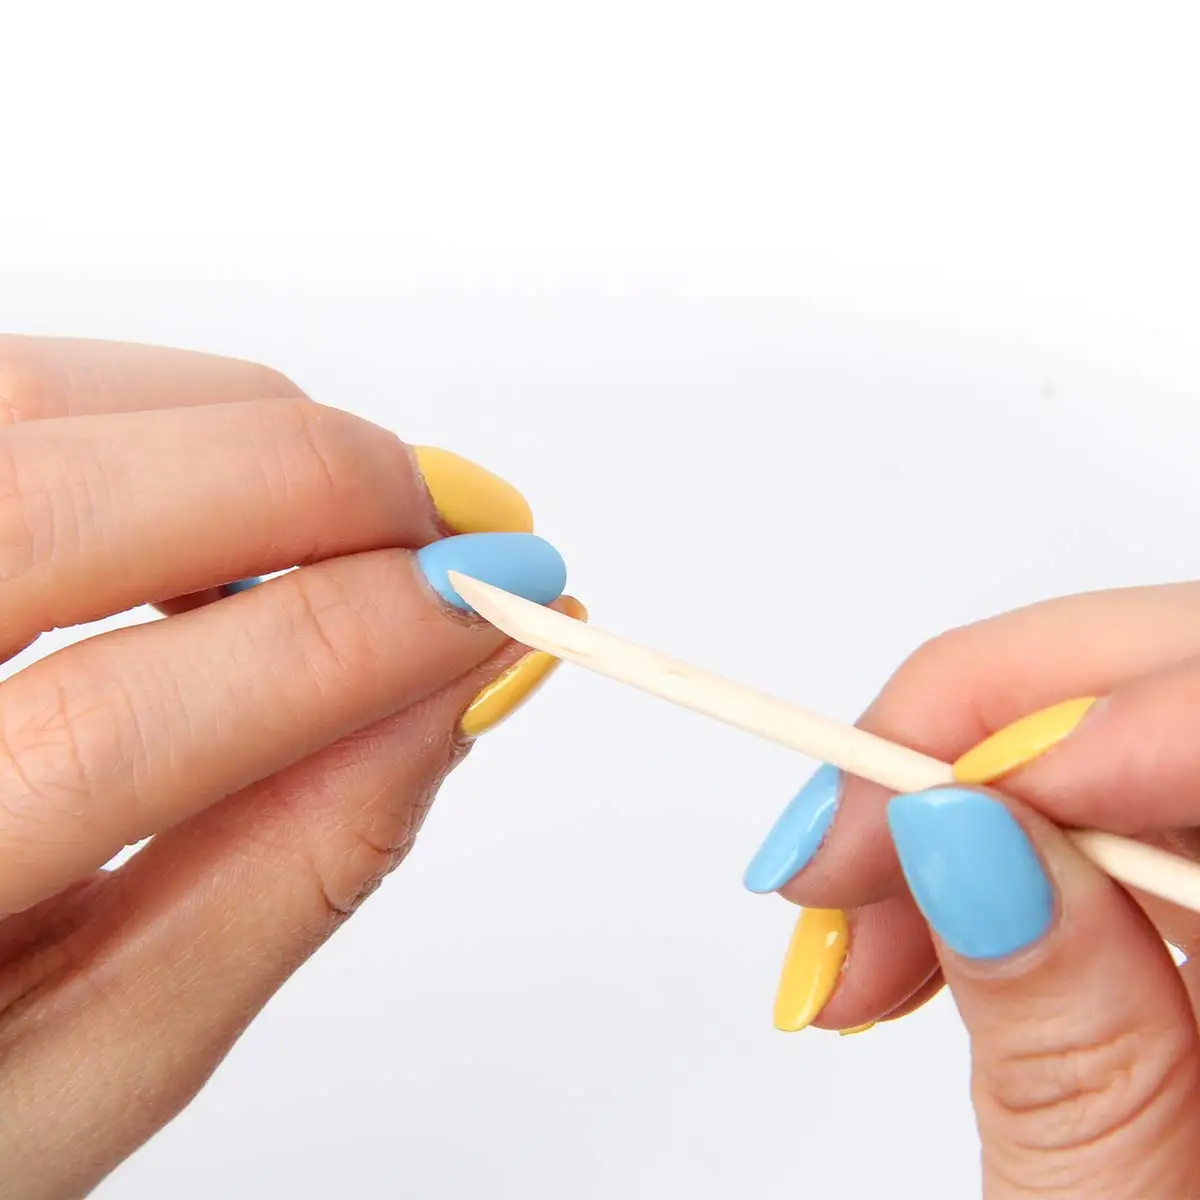 
Double Ended Manicure And Pedicure Tools Disposable Good Quality Nail Art Manicure Wooden Factory Price Orange Wood Sticks 